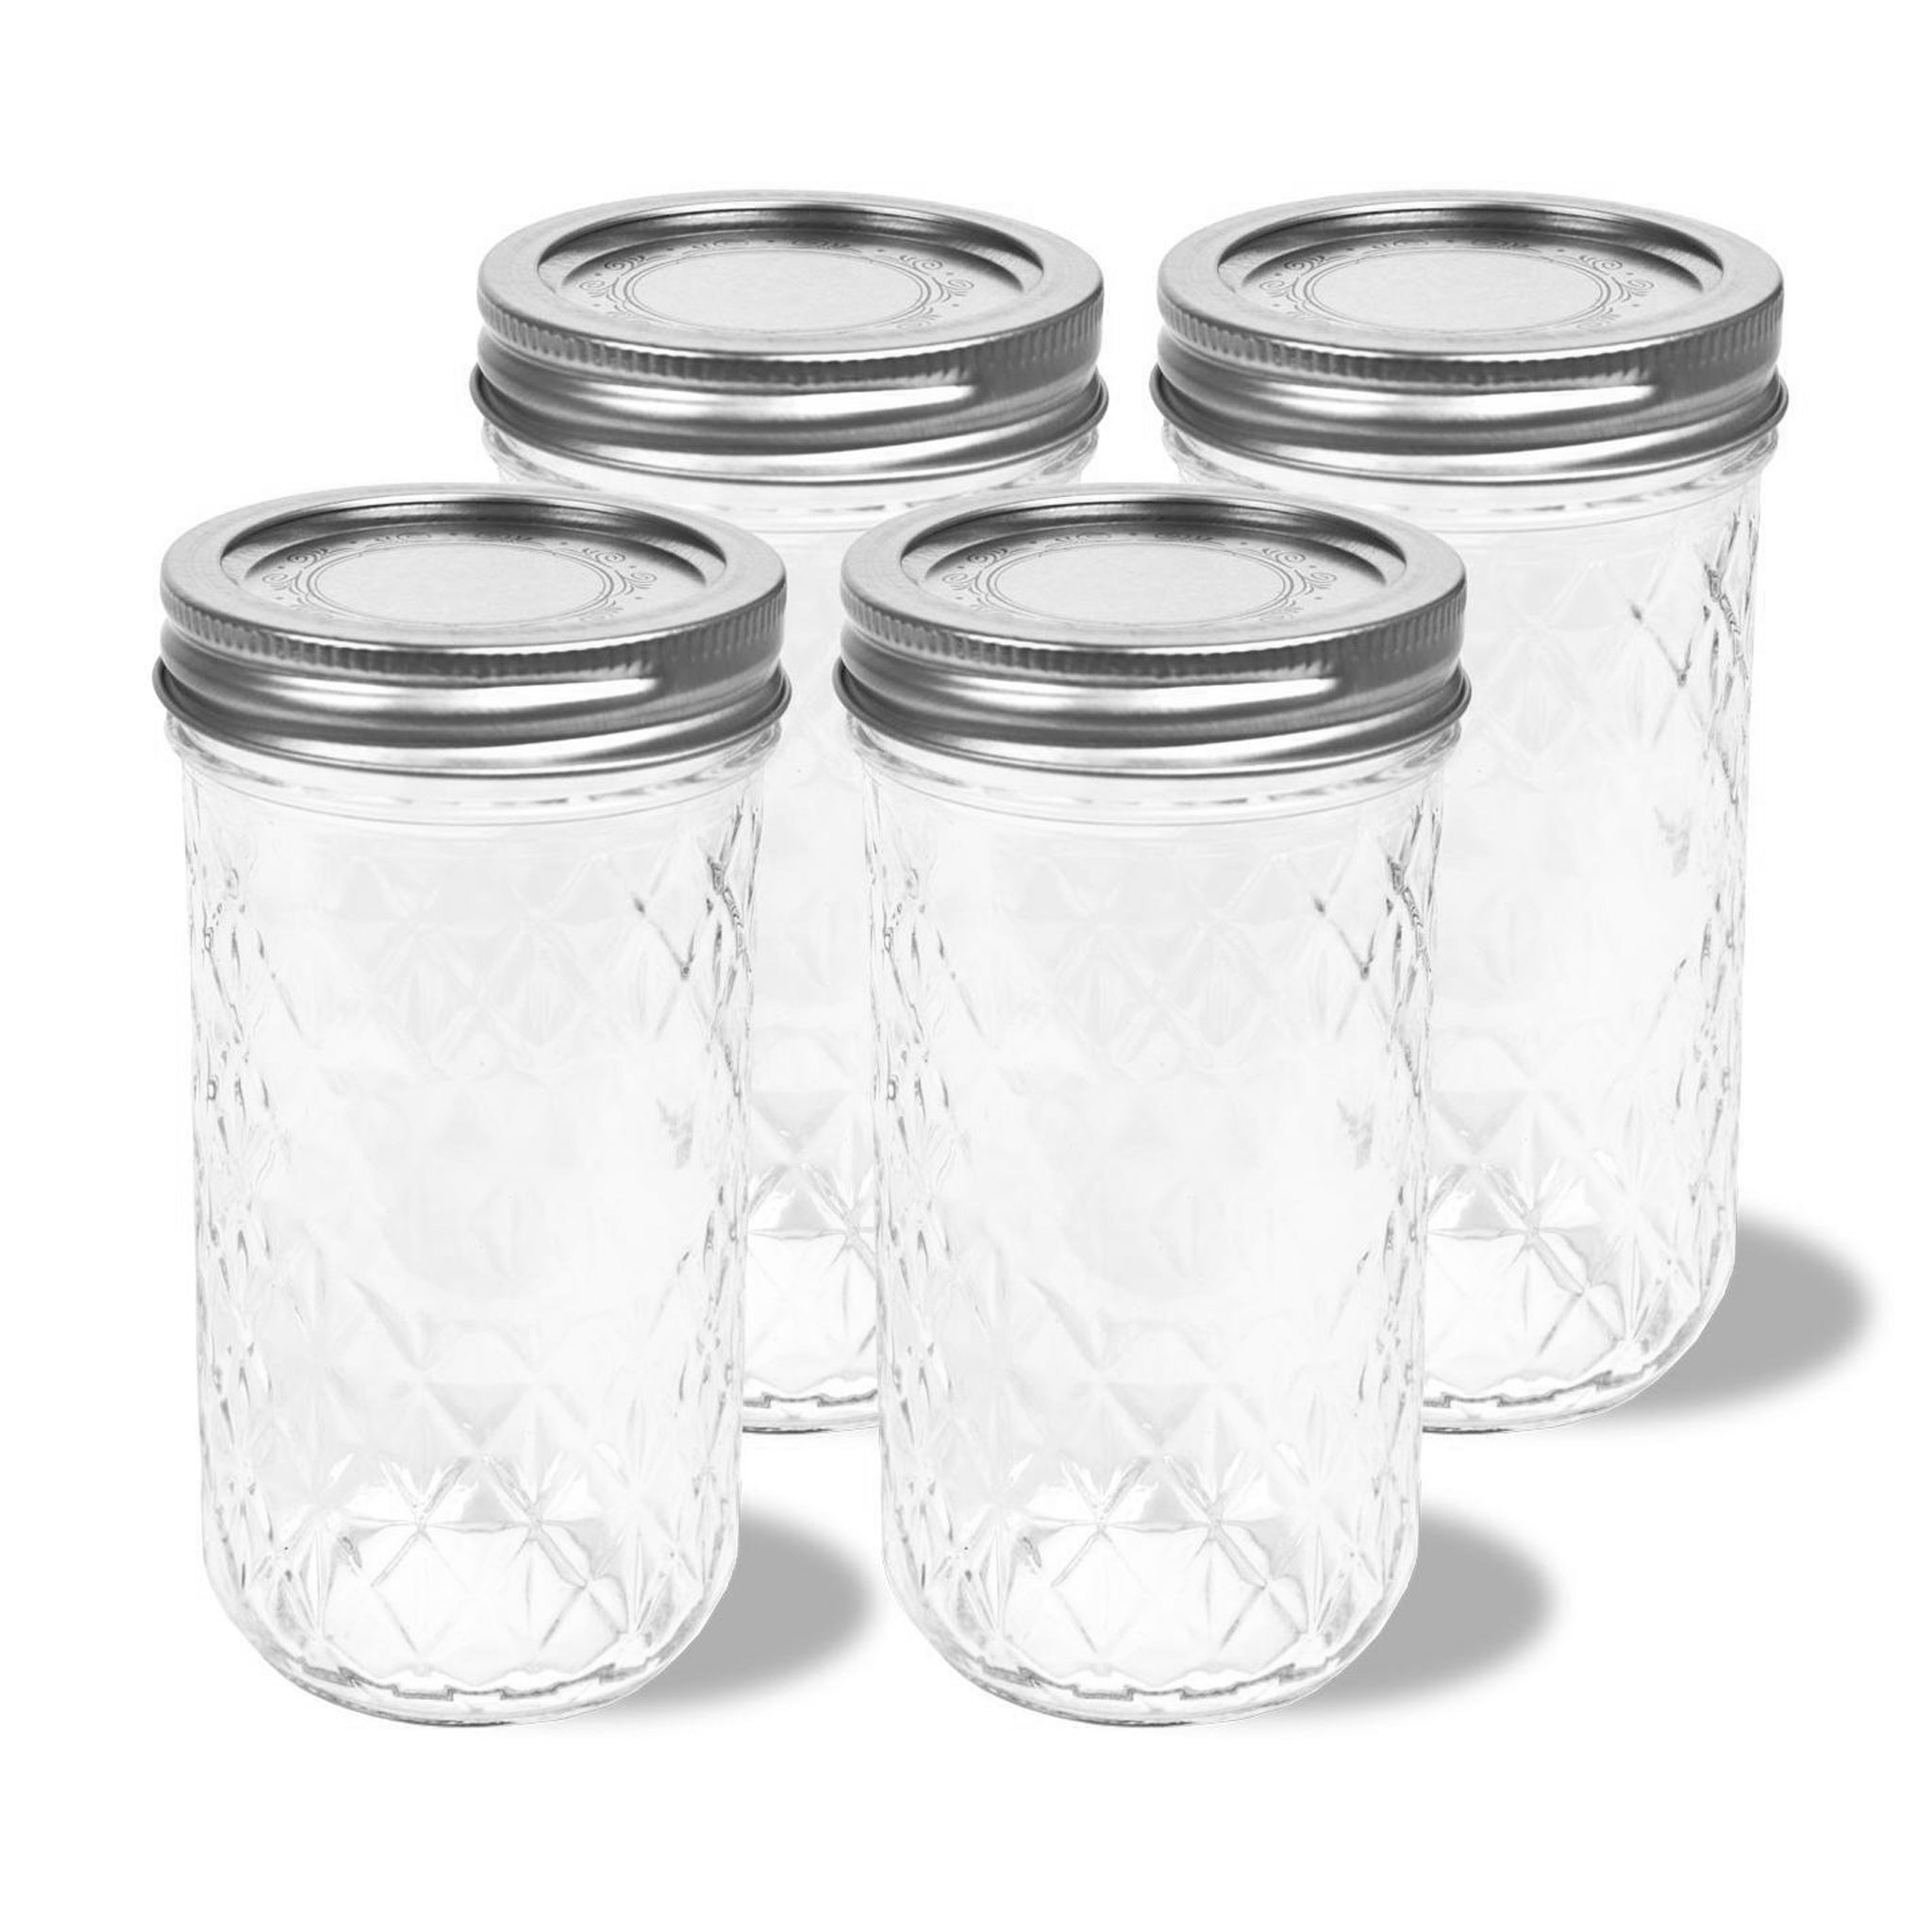 4-Pack Mason Jars (12 oz each) for the Personal Blender®. Blend up delicious smoothies, herbs, coffee beans, baby food and more. Store your recipes in these convenient and easy-to-use jars.